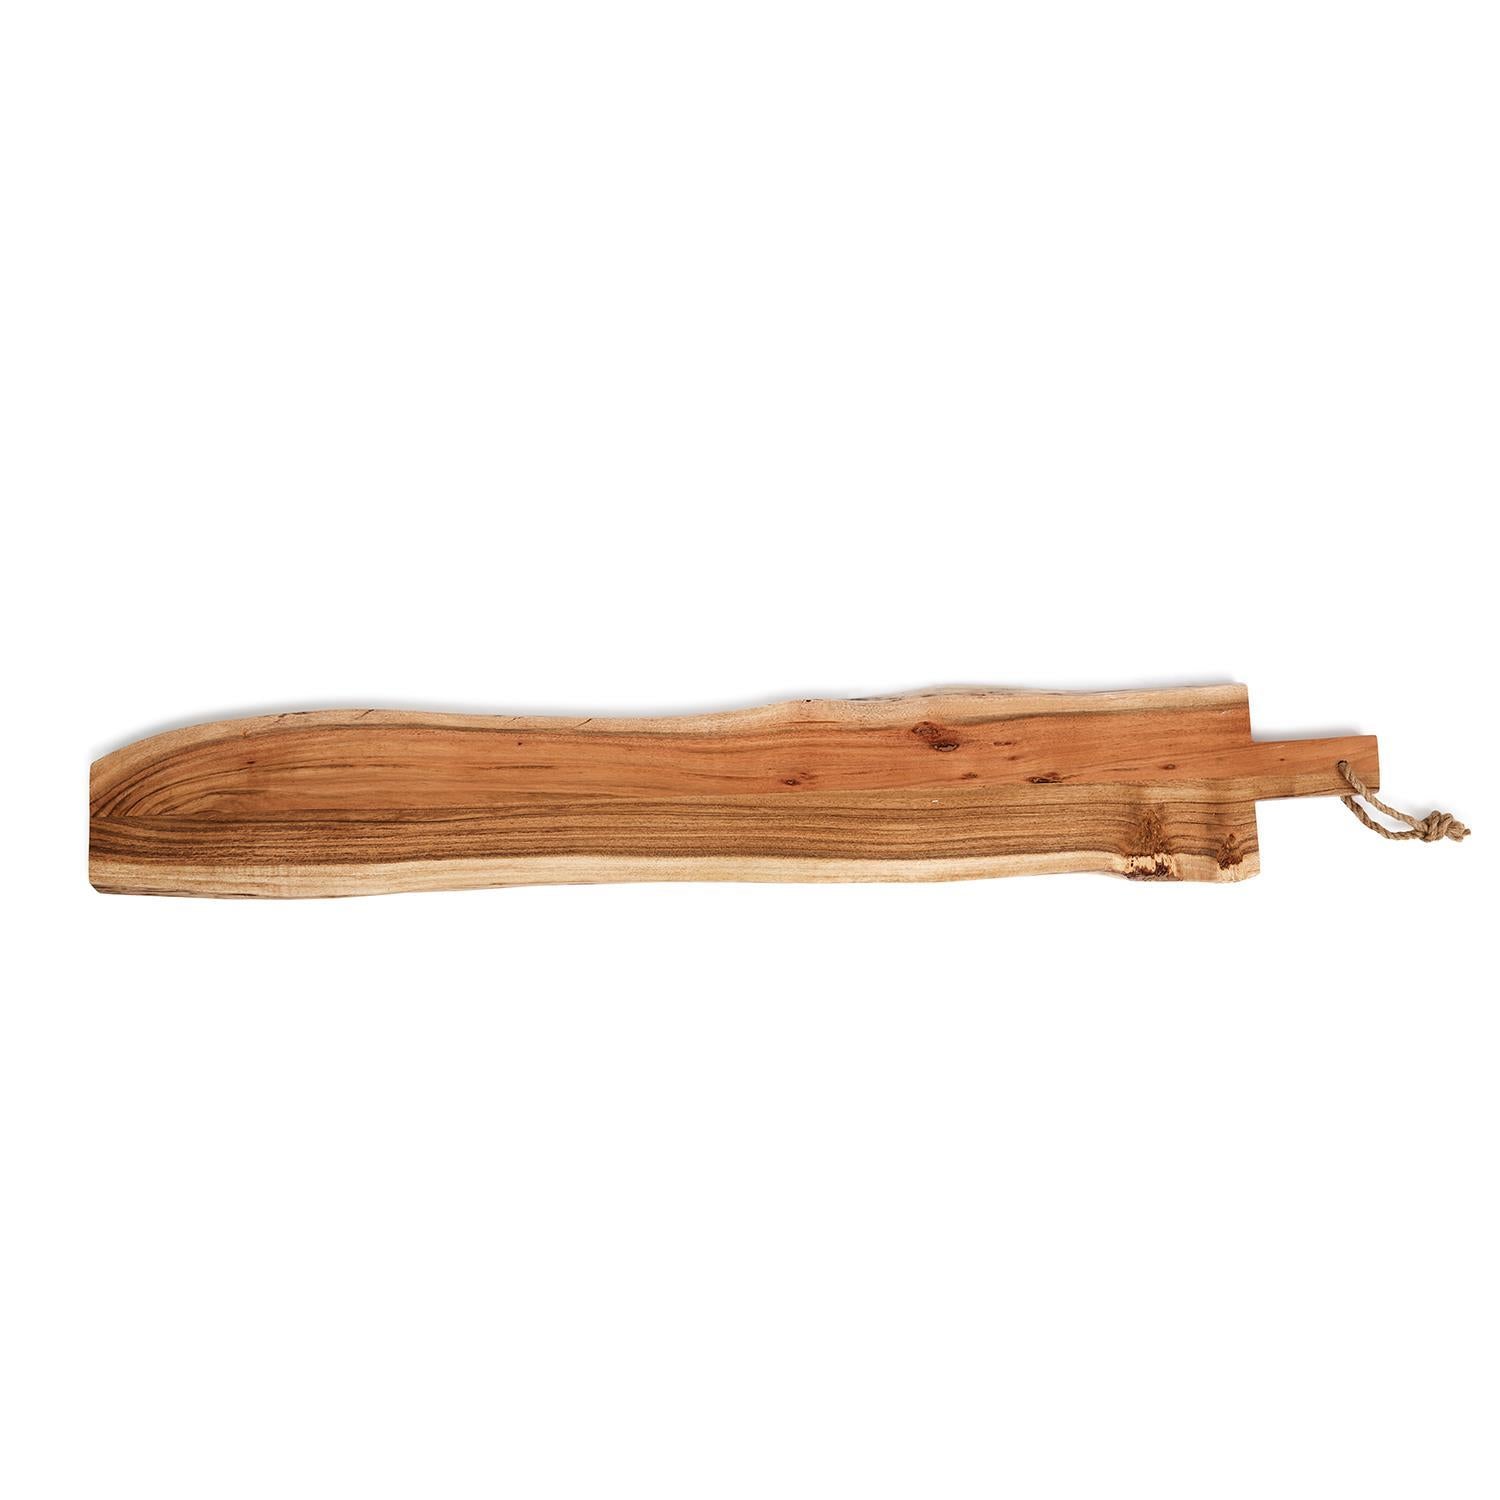 Extra Long ( 54") Raw Edge Wood Serving Board